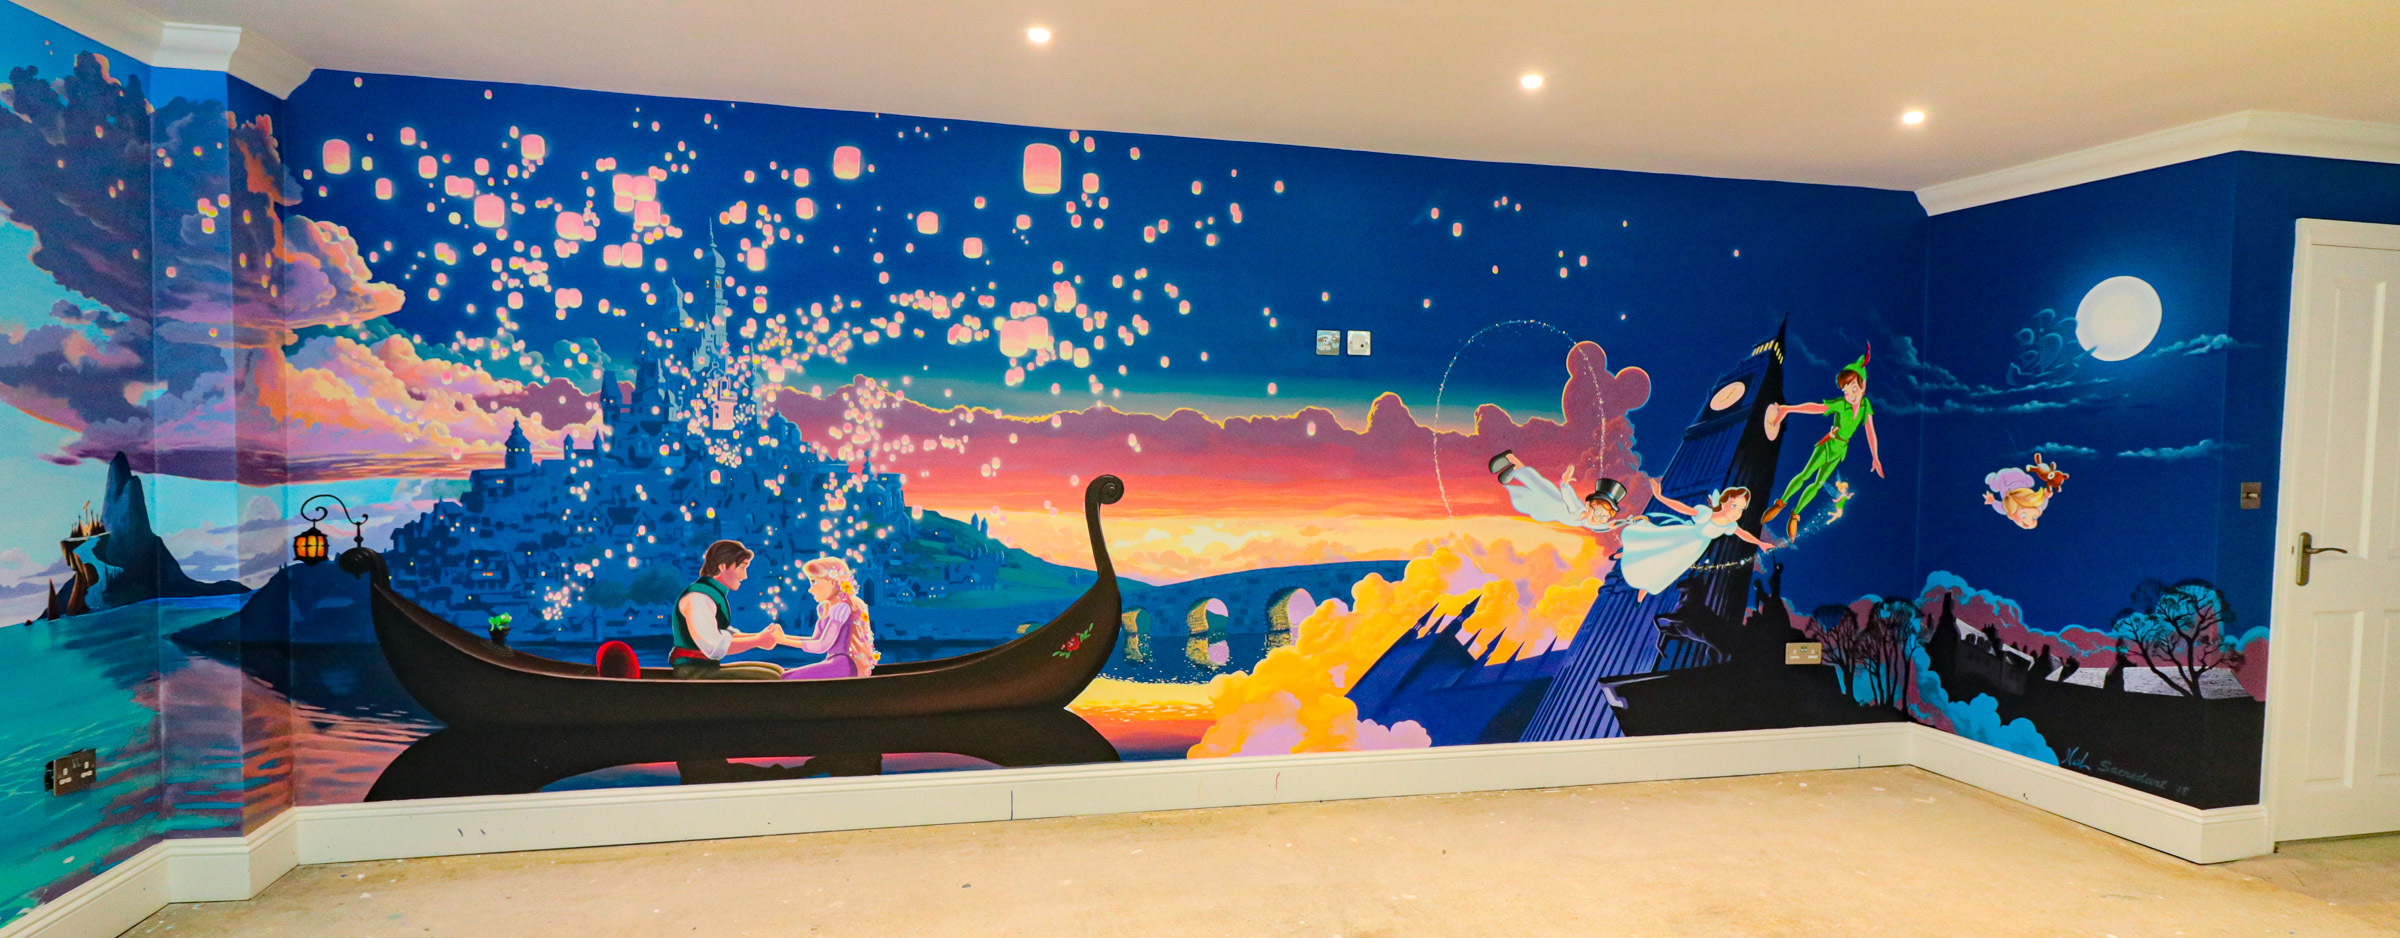 playroom mural, featuring Jungle book characters Mowgli Bagheera and Baloo, plus Lilo and Stitch, the Little Mermaid, Woody and Buzz Lightyear and more details in an expansive Moana backdrop